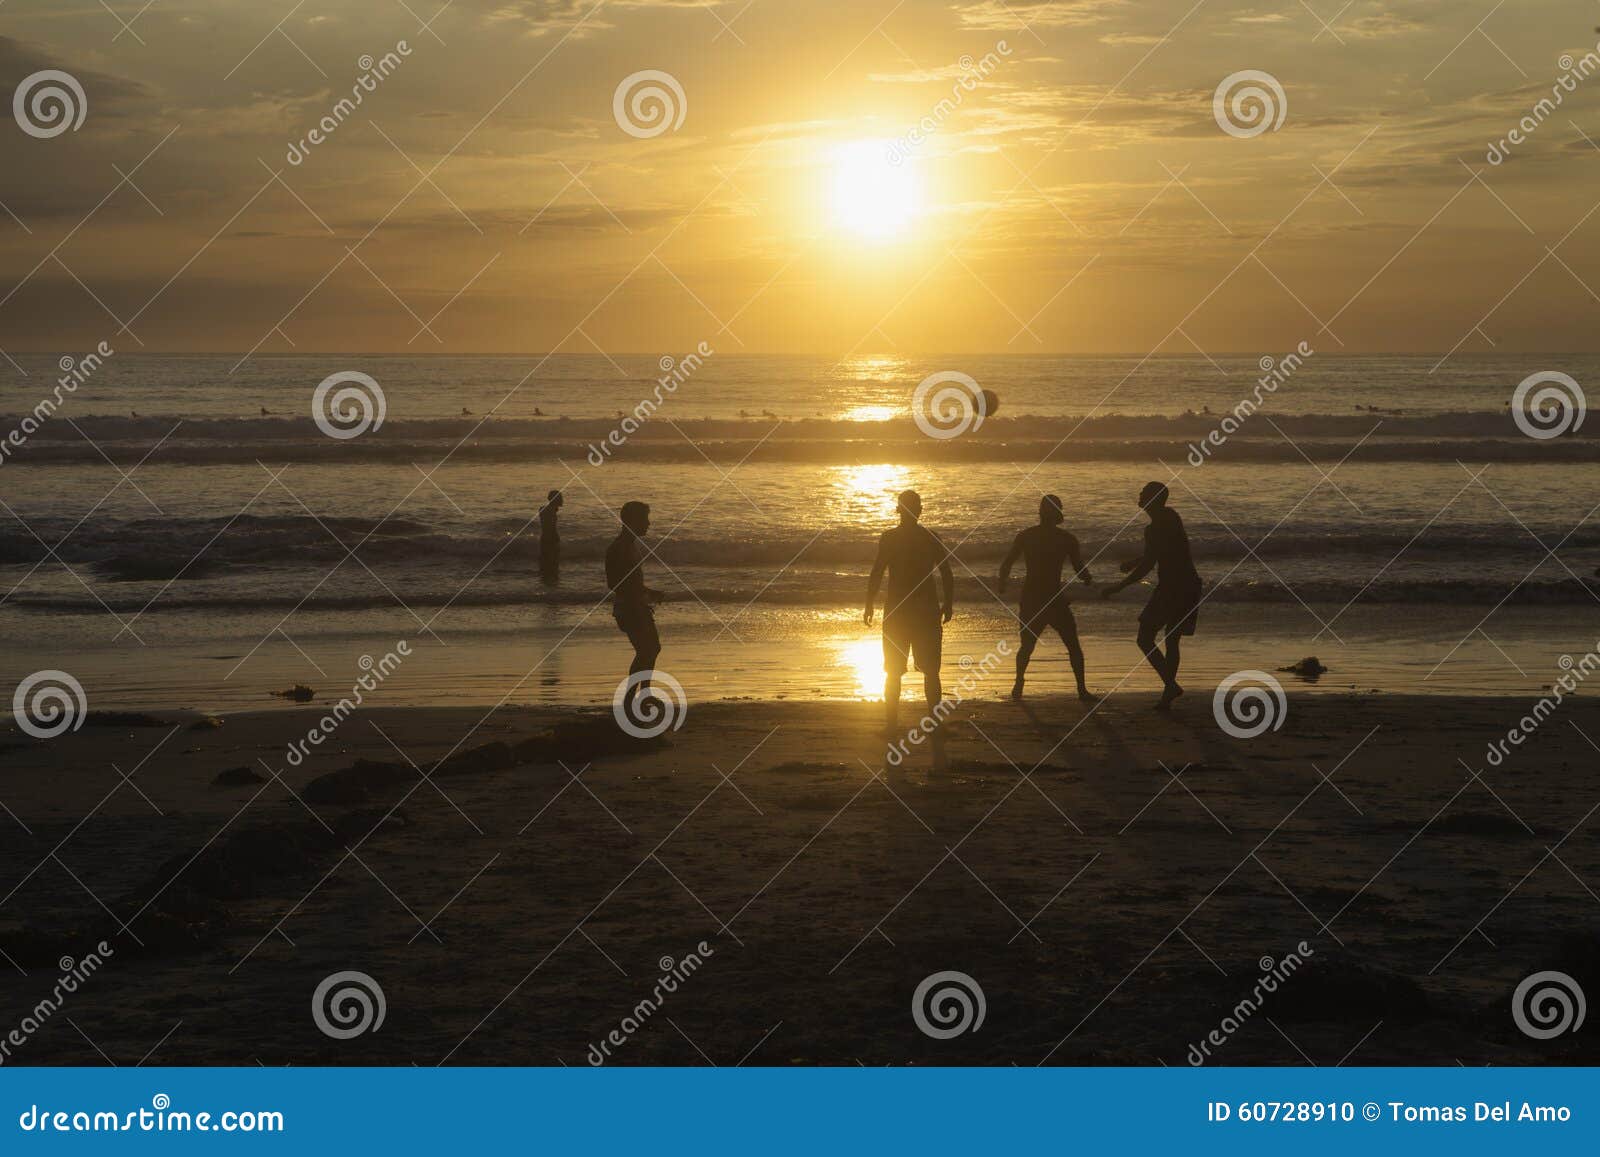 Soccer on the beach stock photo. Image of silhouette - 60728910